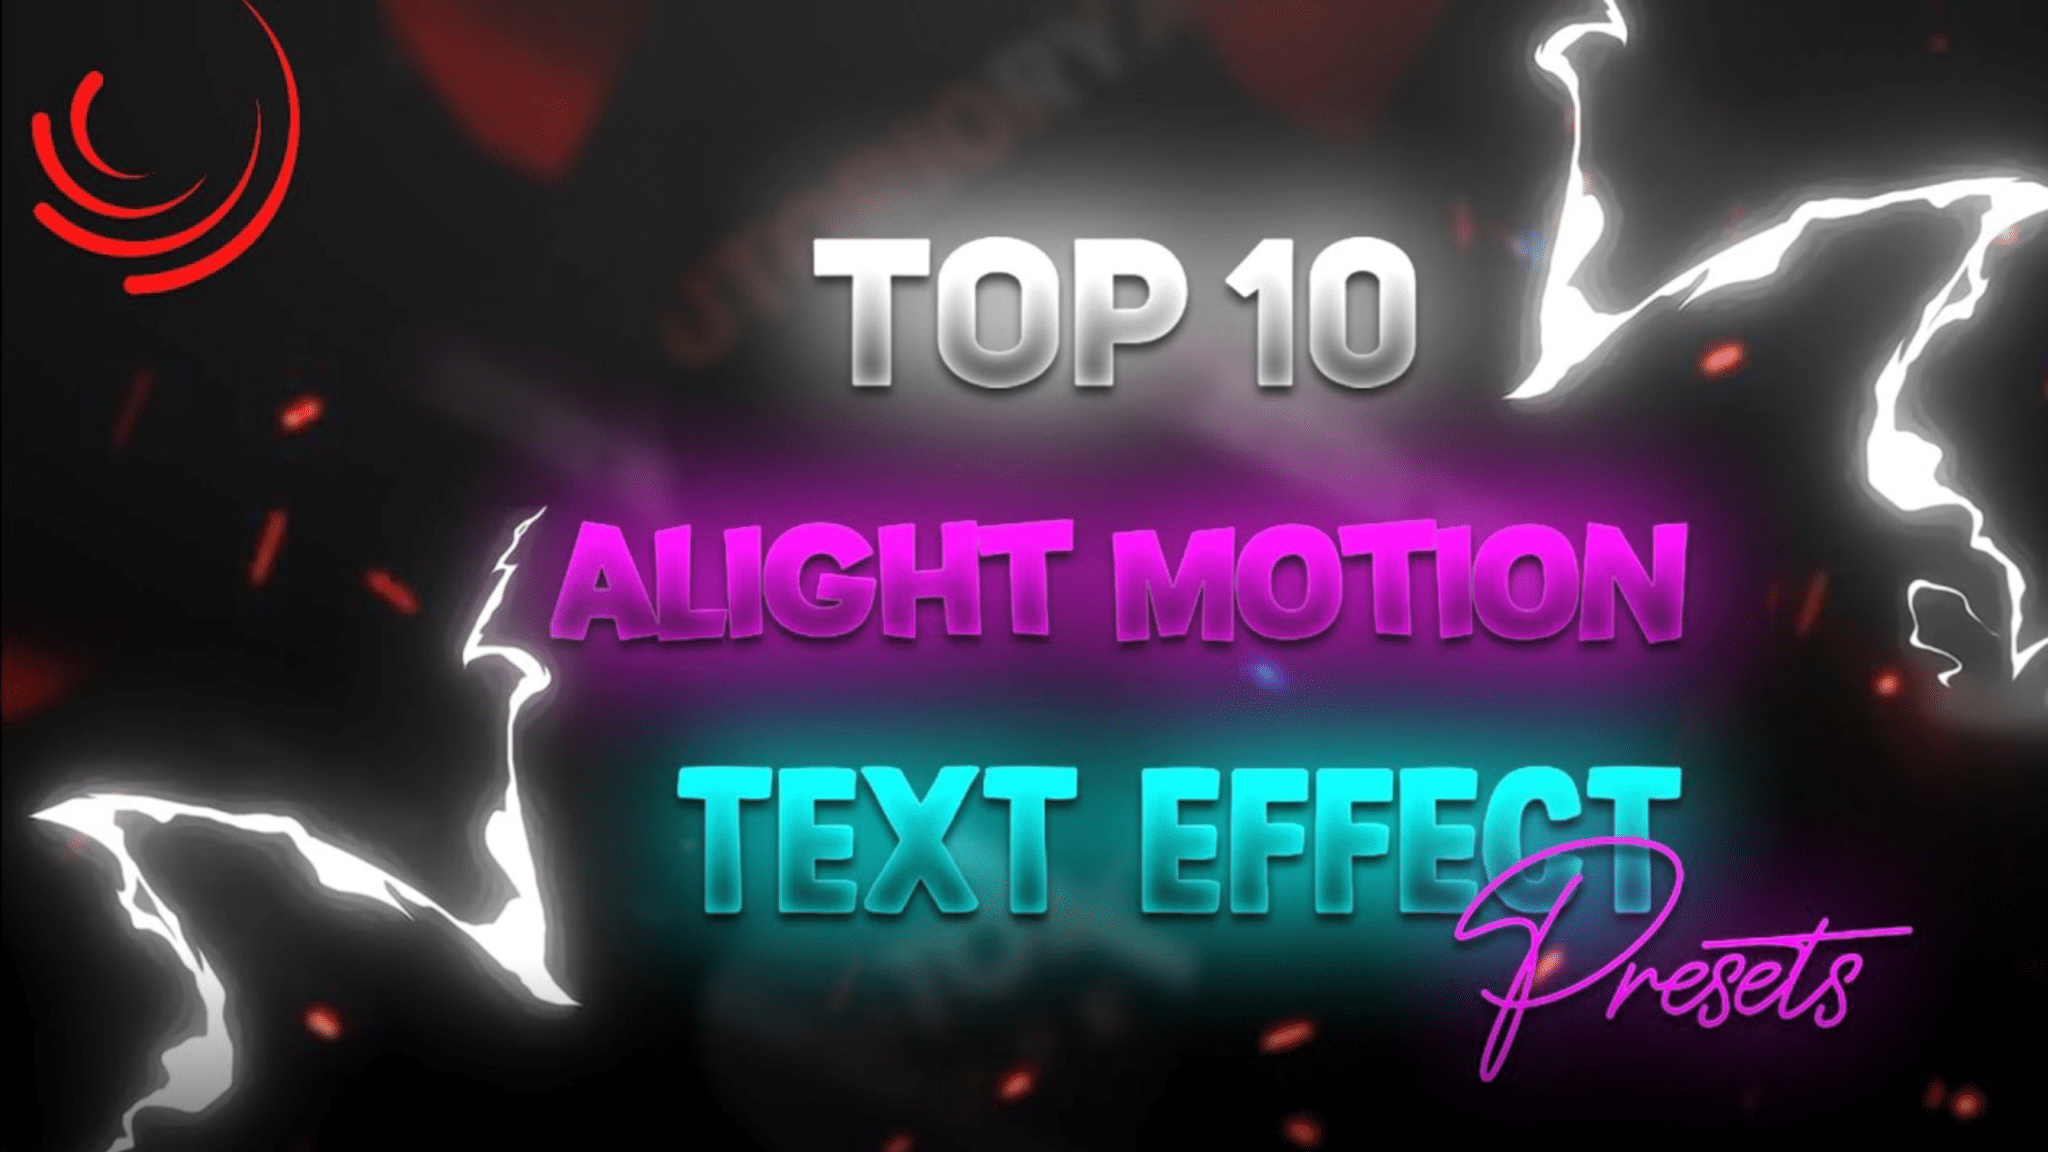 Top 10 Alight motion text effect